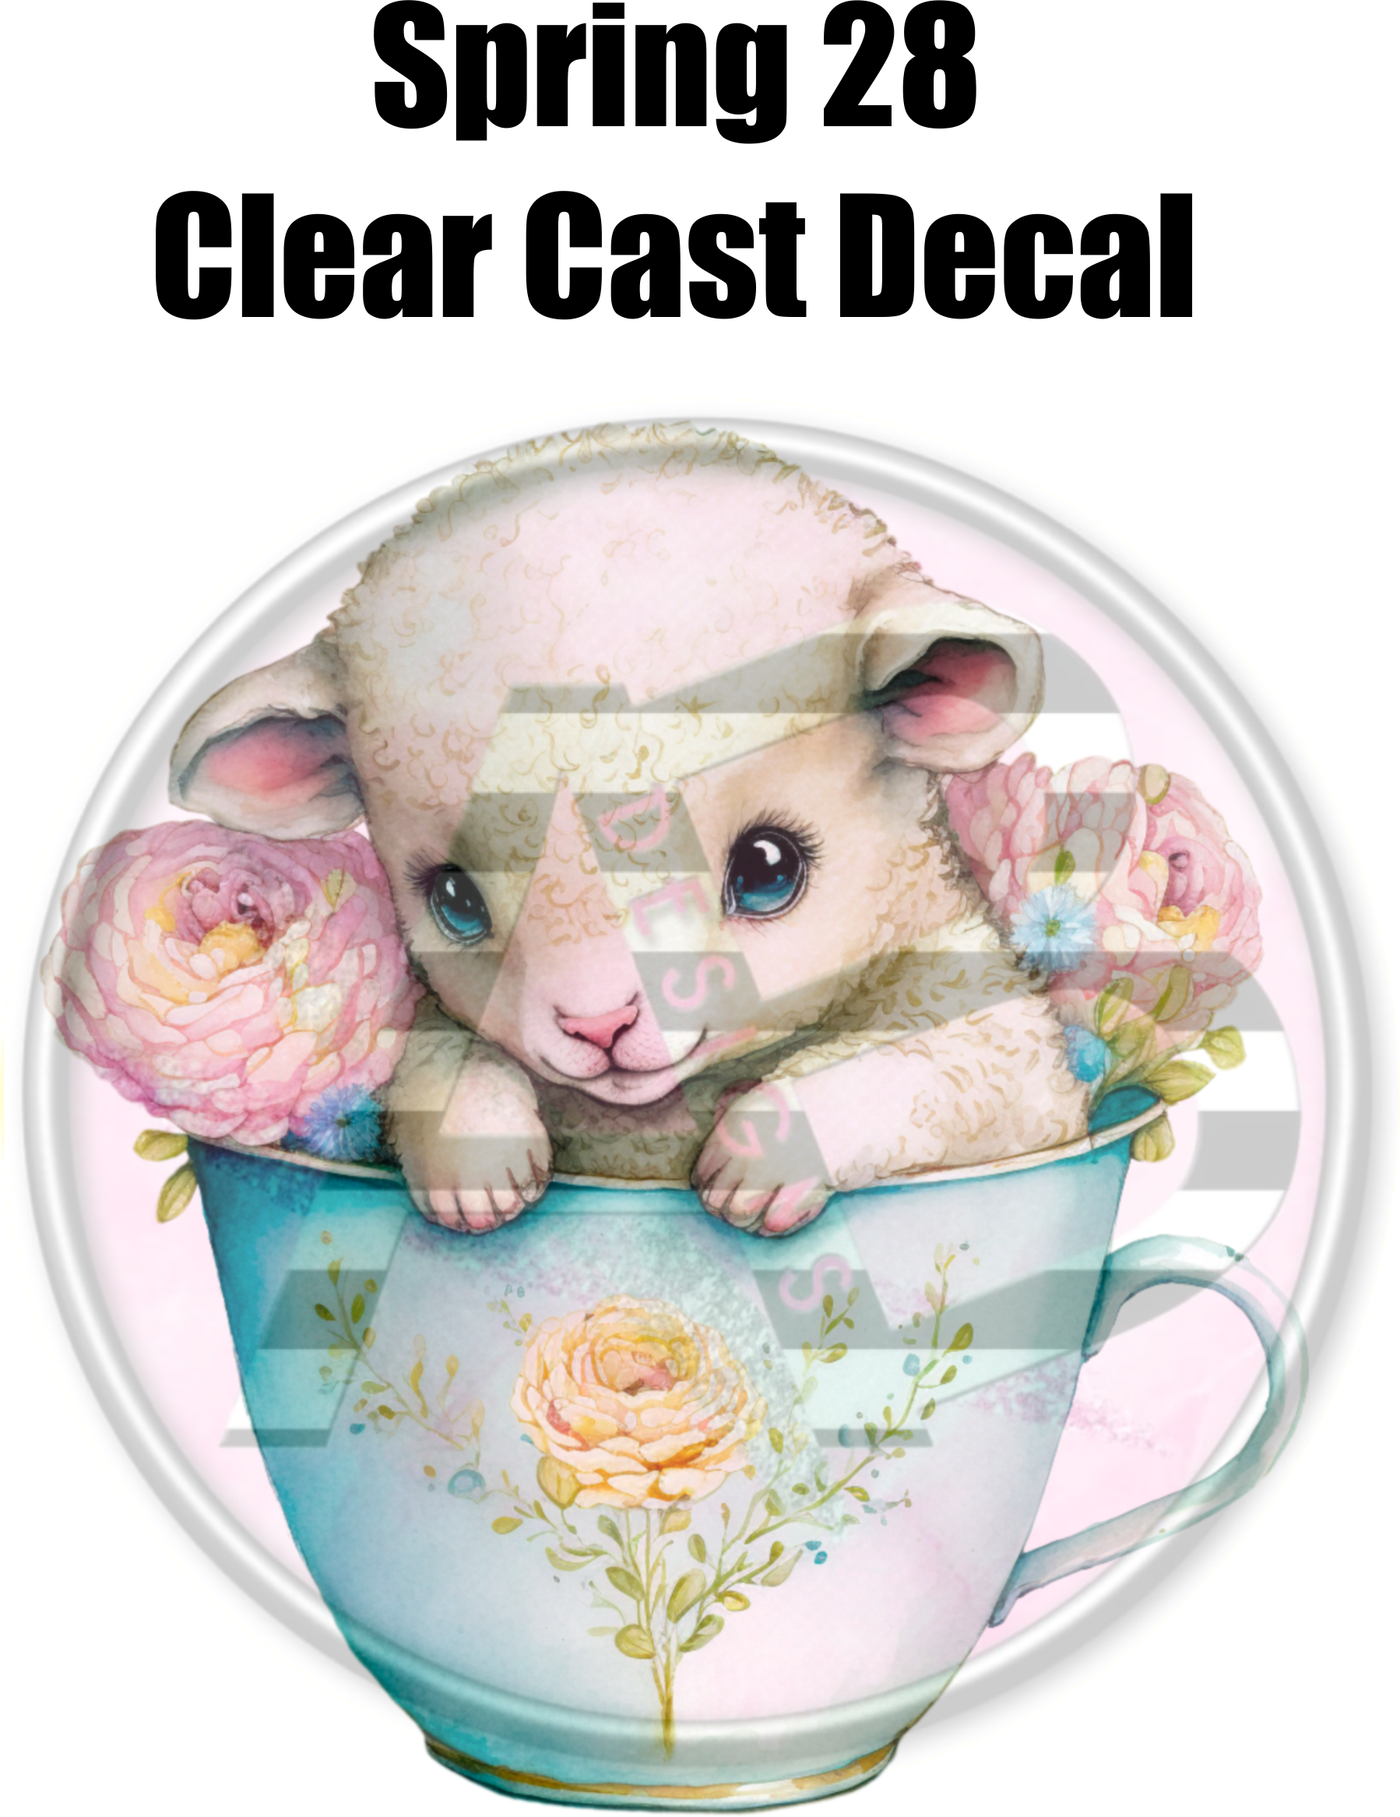 Spring 28 - Clear Cast Decal